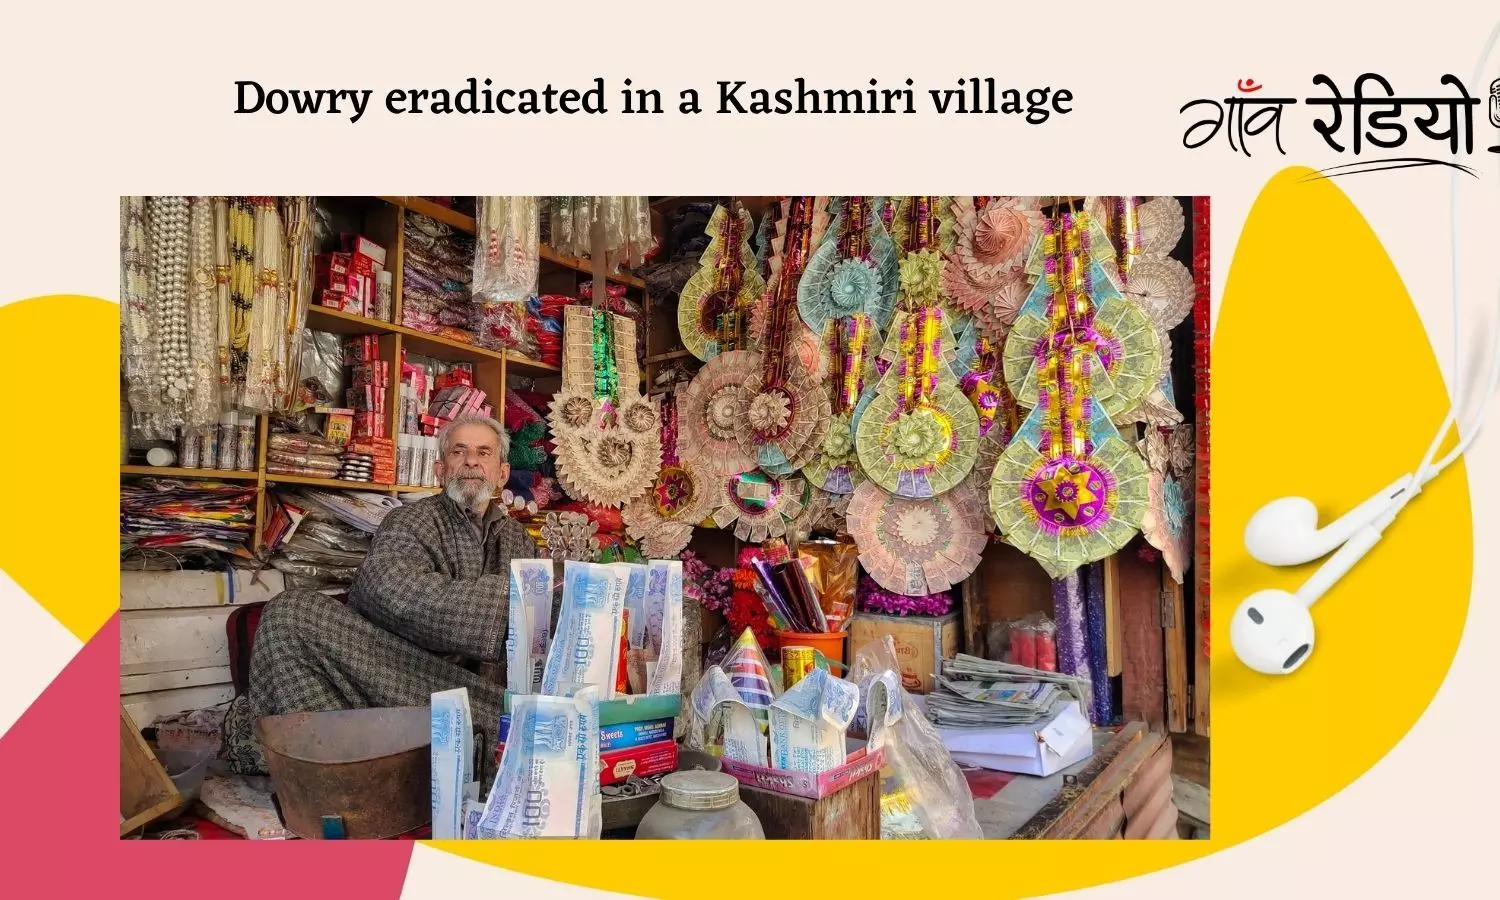 Gaon Radio: Listen to the story of a Kashmiri village where dowry has not been practiced for 3 decades